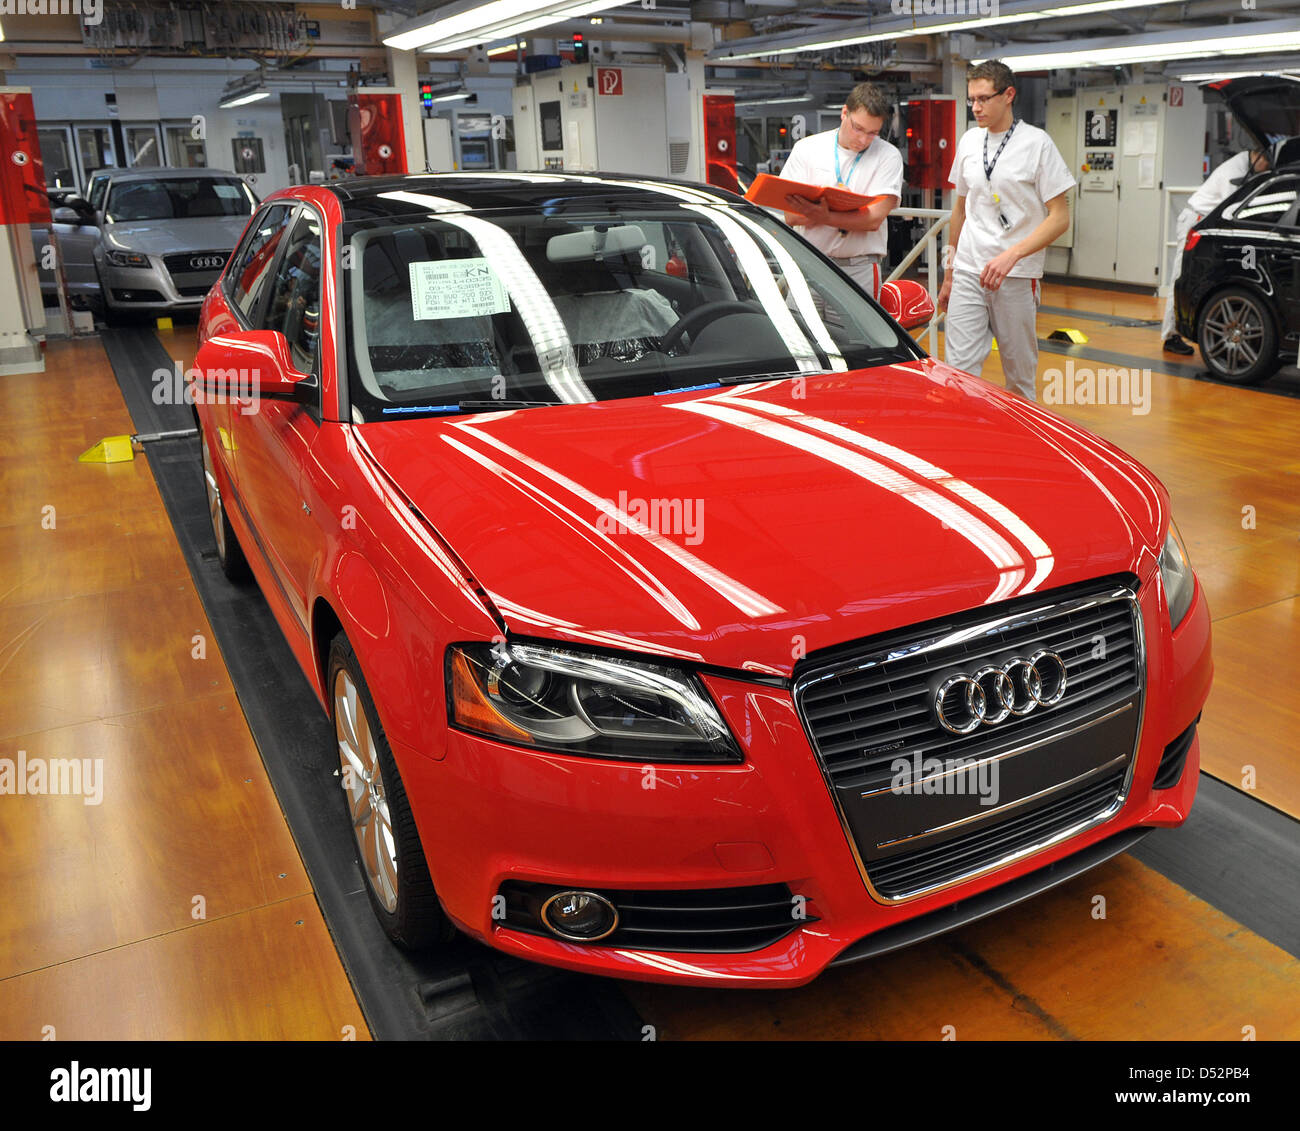 Production of Audi's A3 at the plant in Ingolstadt, Germany, 08 March 2010.  Audi present its 2009 balance sheet in a press conference the following  day, 09 March 2010. Photo: Stefan Puchner Stock Photo - Alamy